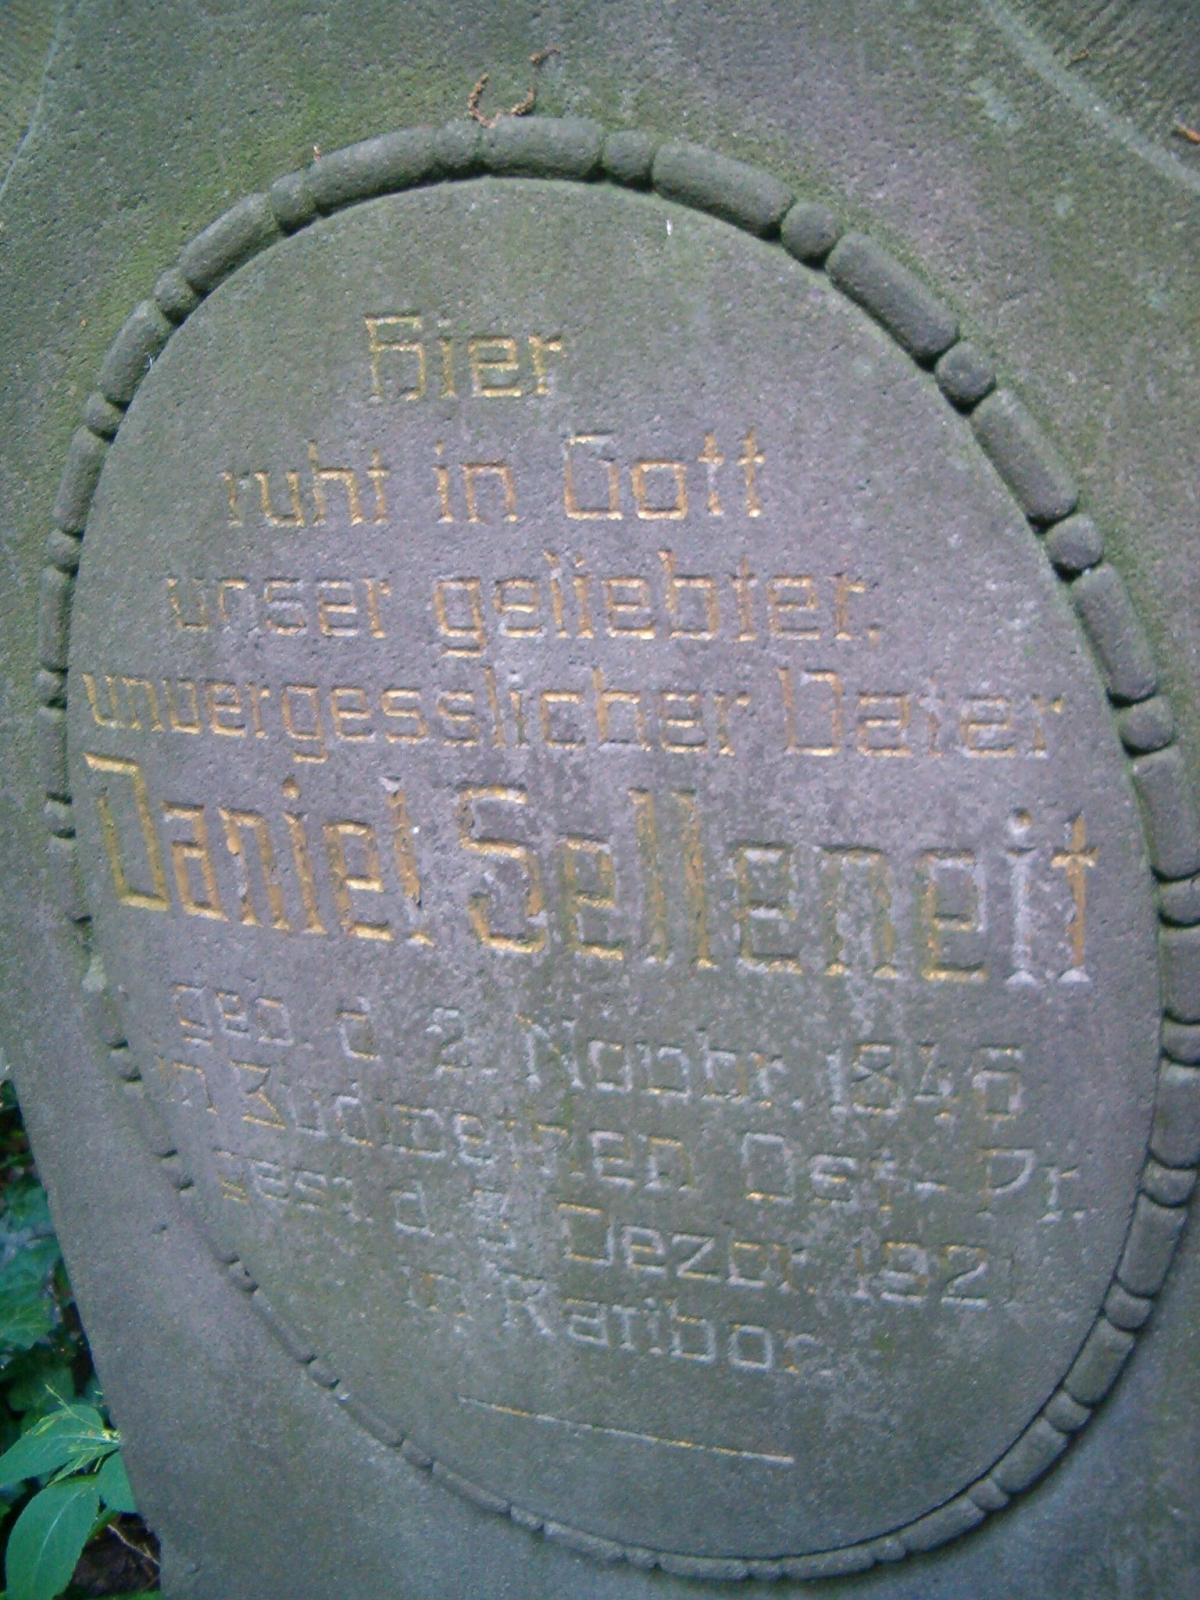 Wikipedia, Files with no machine-readable source, Images without source, Protestant cemetery in Raci